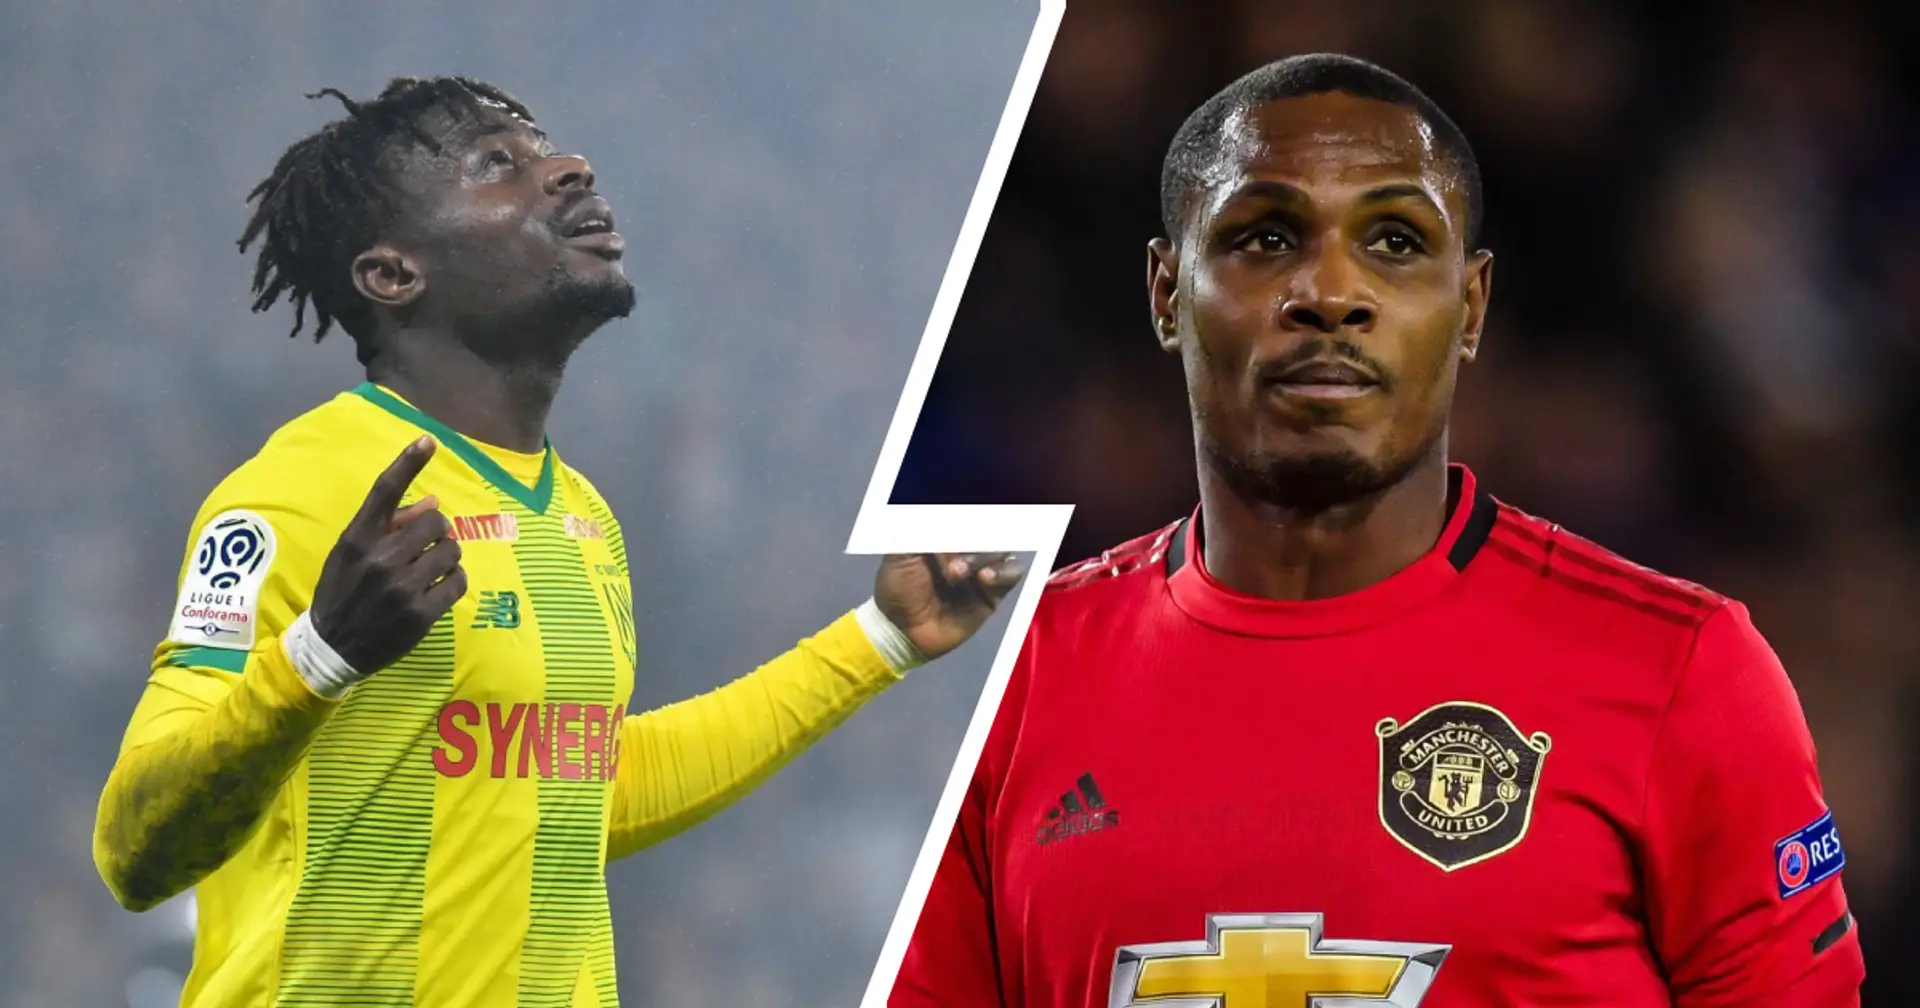 Nigeria international Moses Simon: 'It will be good for Nigerian football to see Ighalo succeed at Old Trafford'